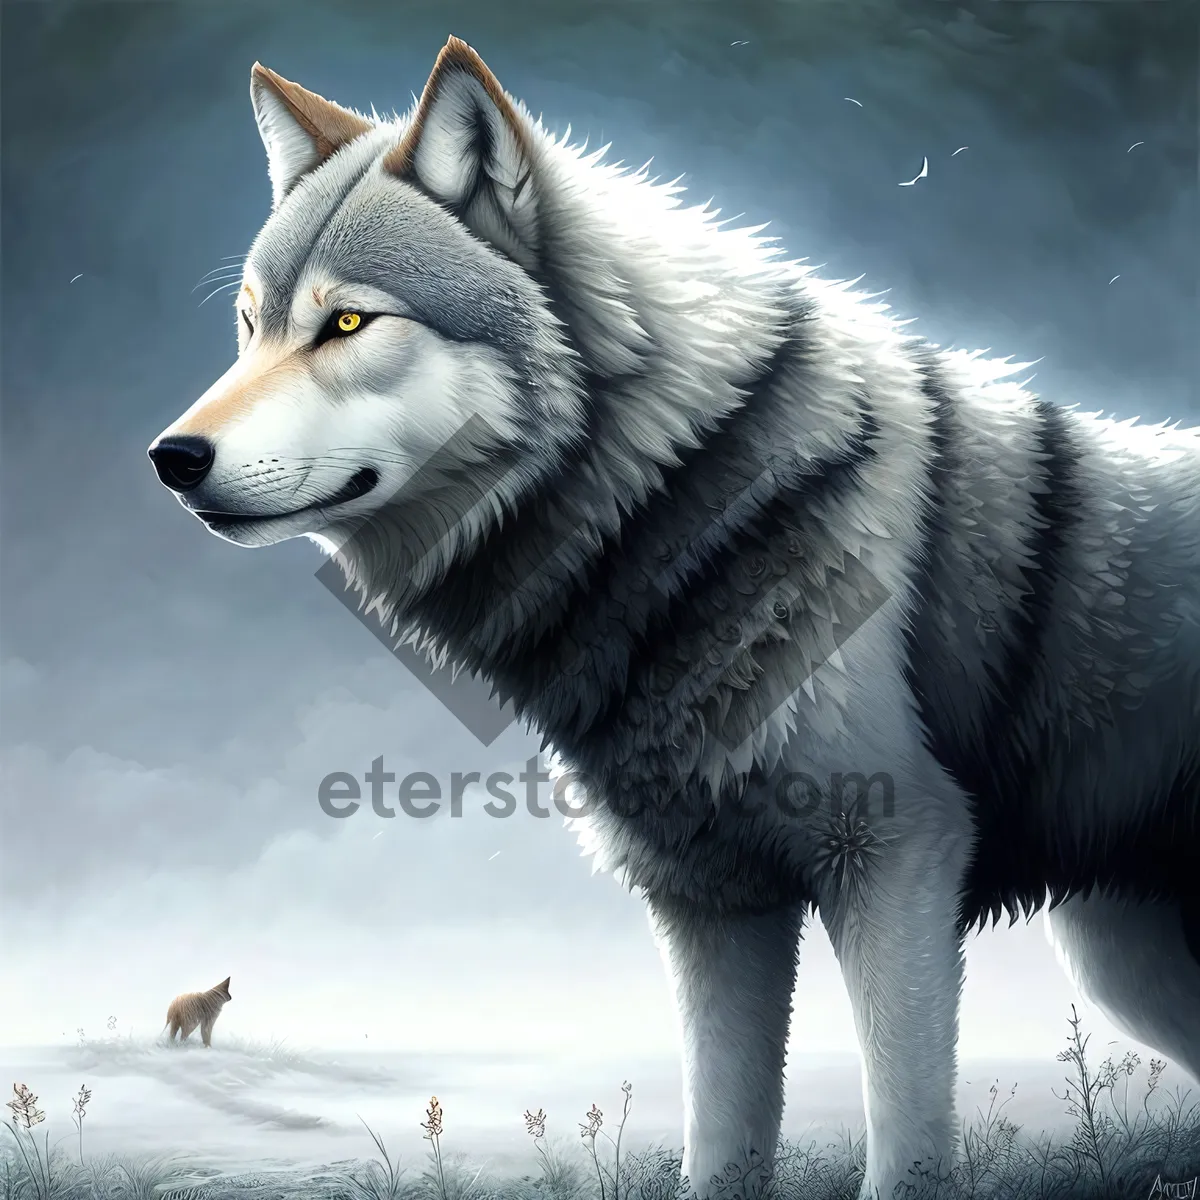 Picture of Majestic Malamute: Captivating Canine's Snowy Stare